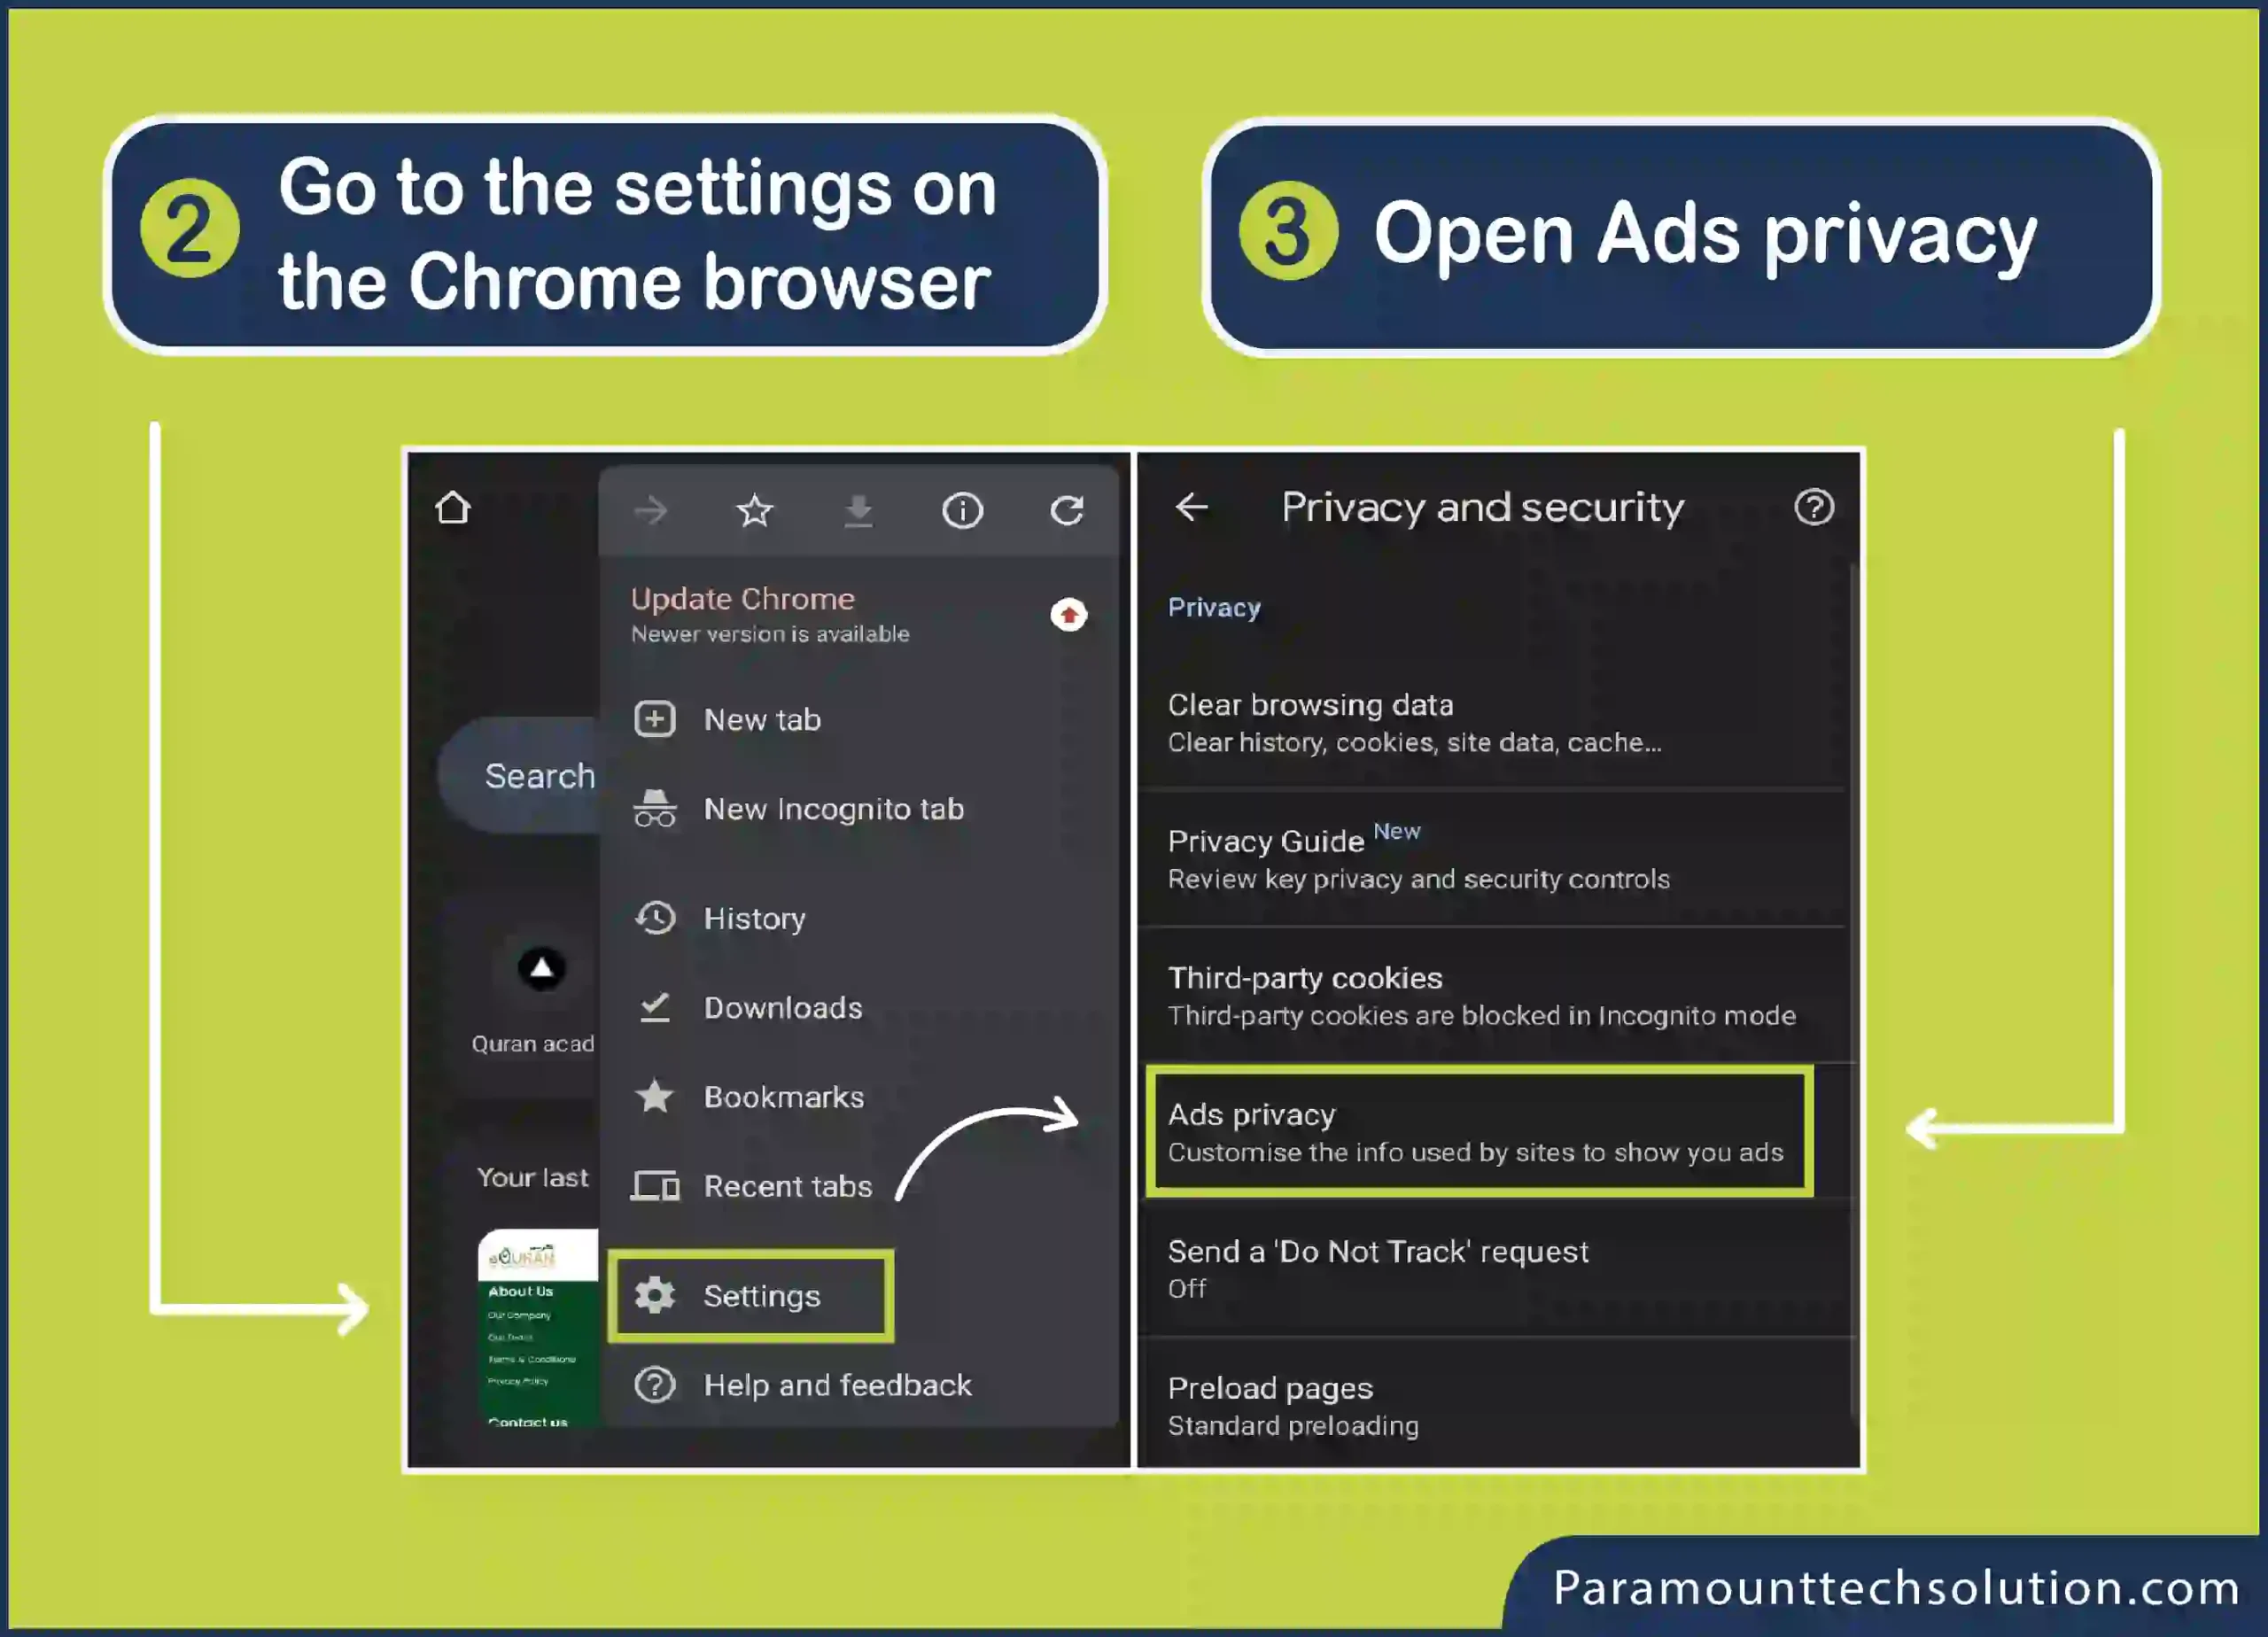 Chrome browser pop up blocker using the pop up settings in Chrome